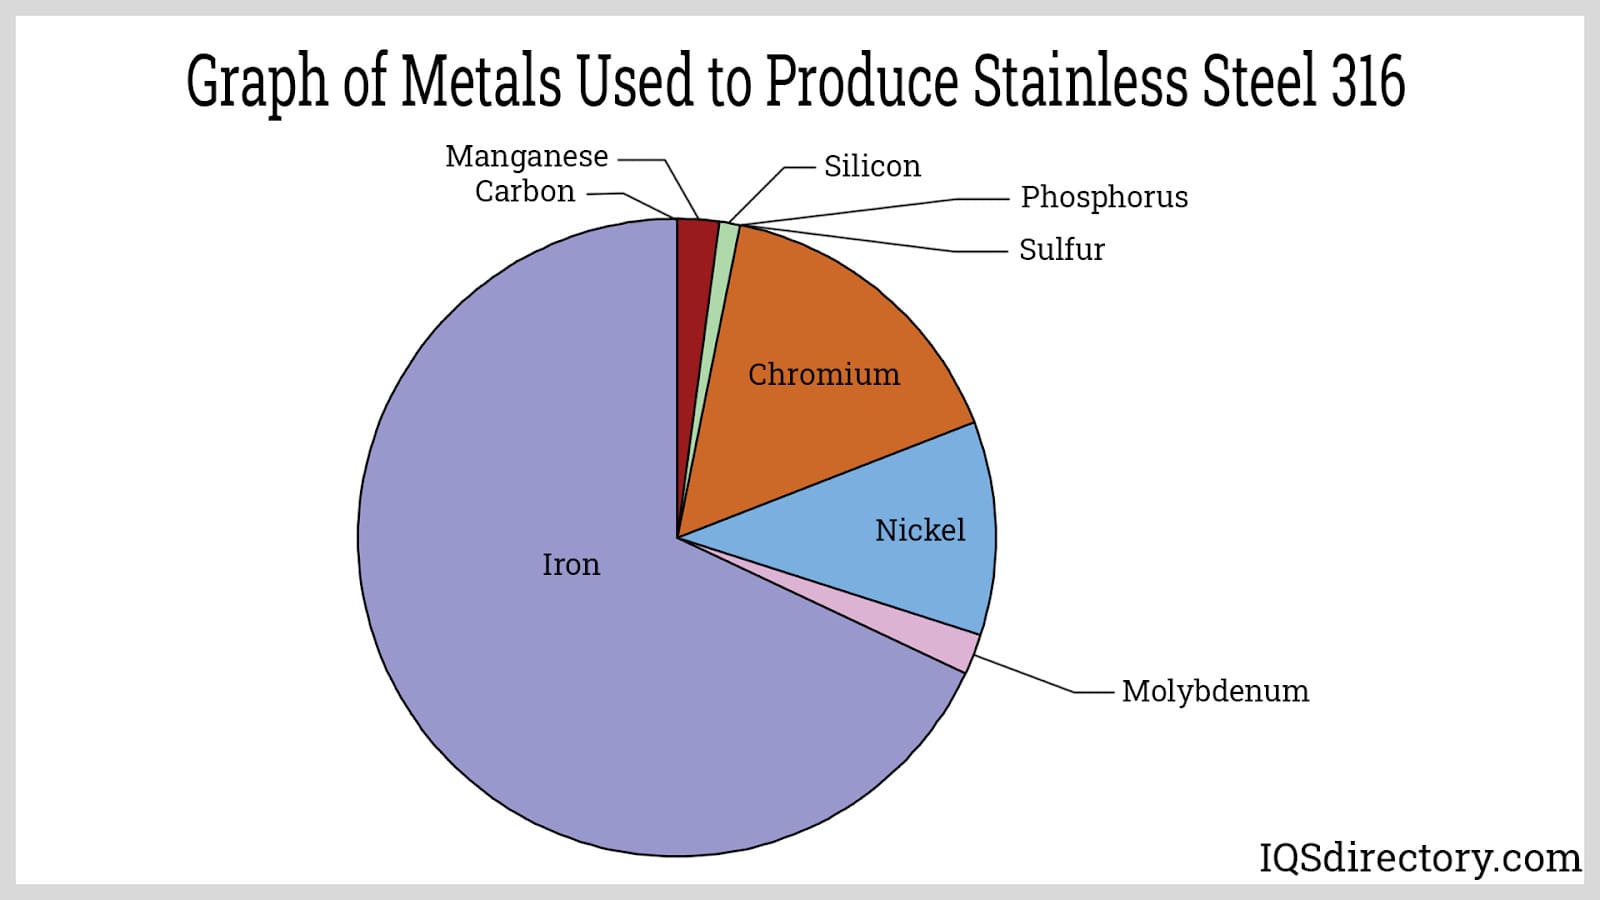 Graph of Metals Used to Produce Stainless Steel 316